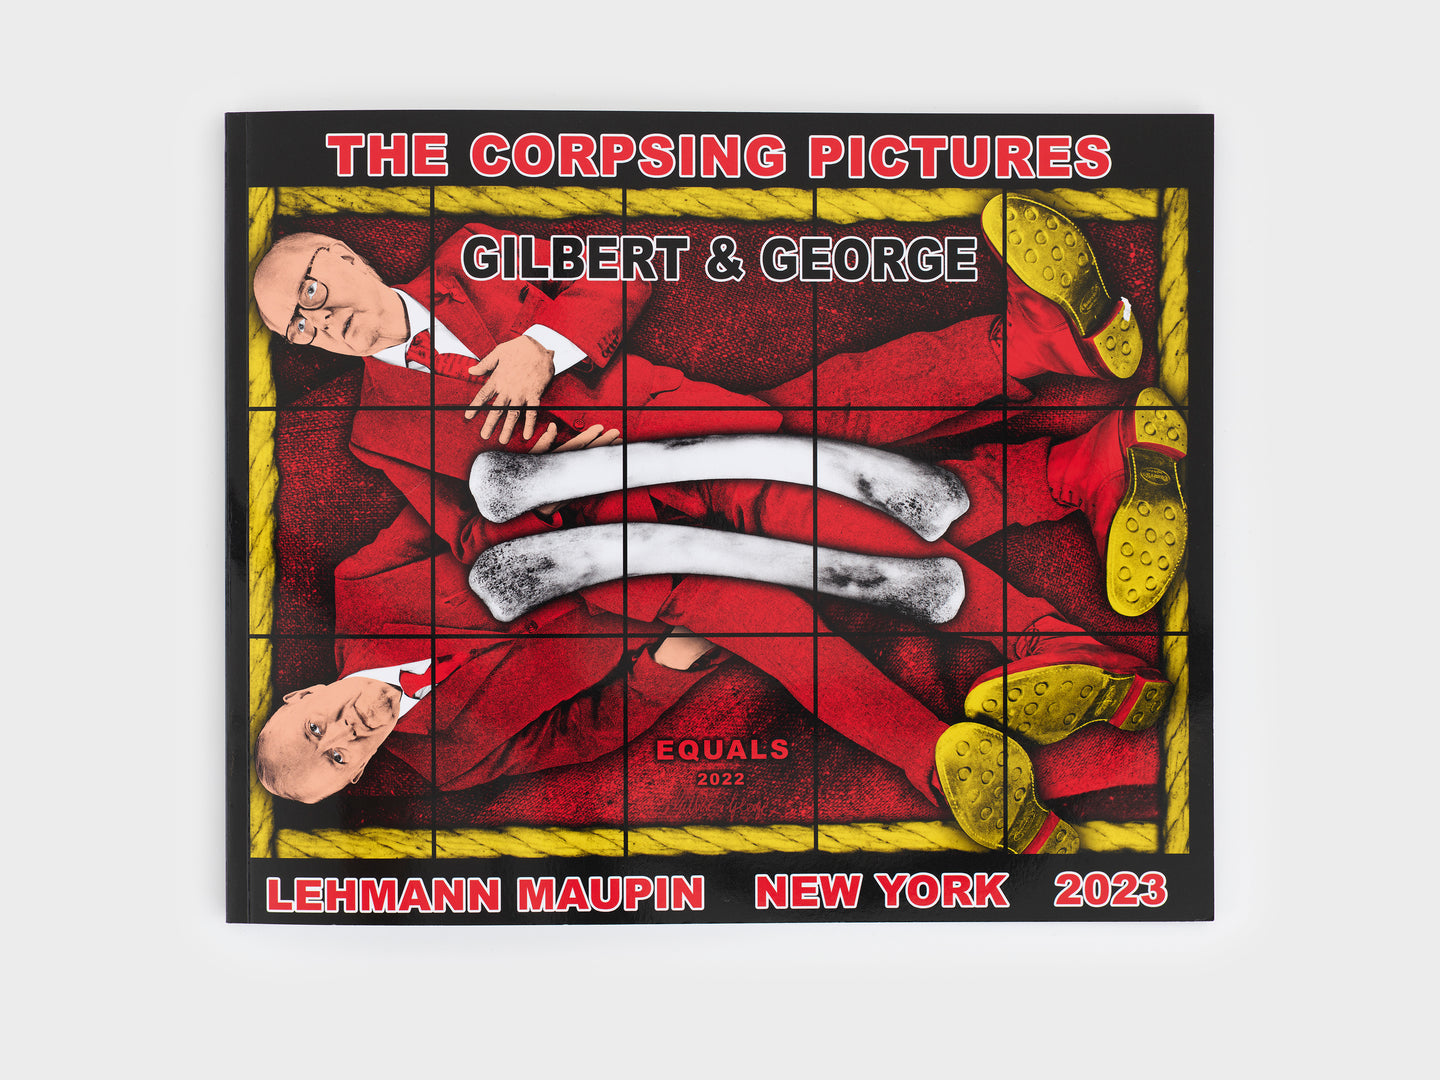 THE CORPSING PICTURES Catalog